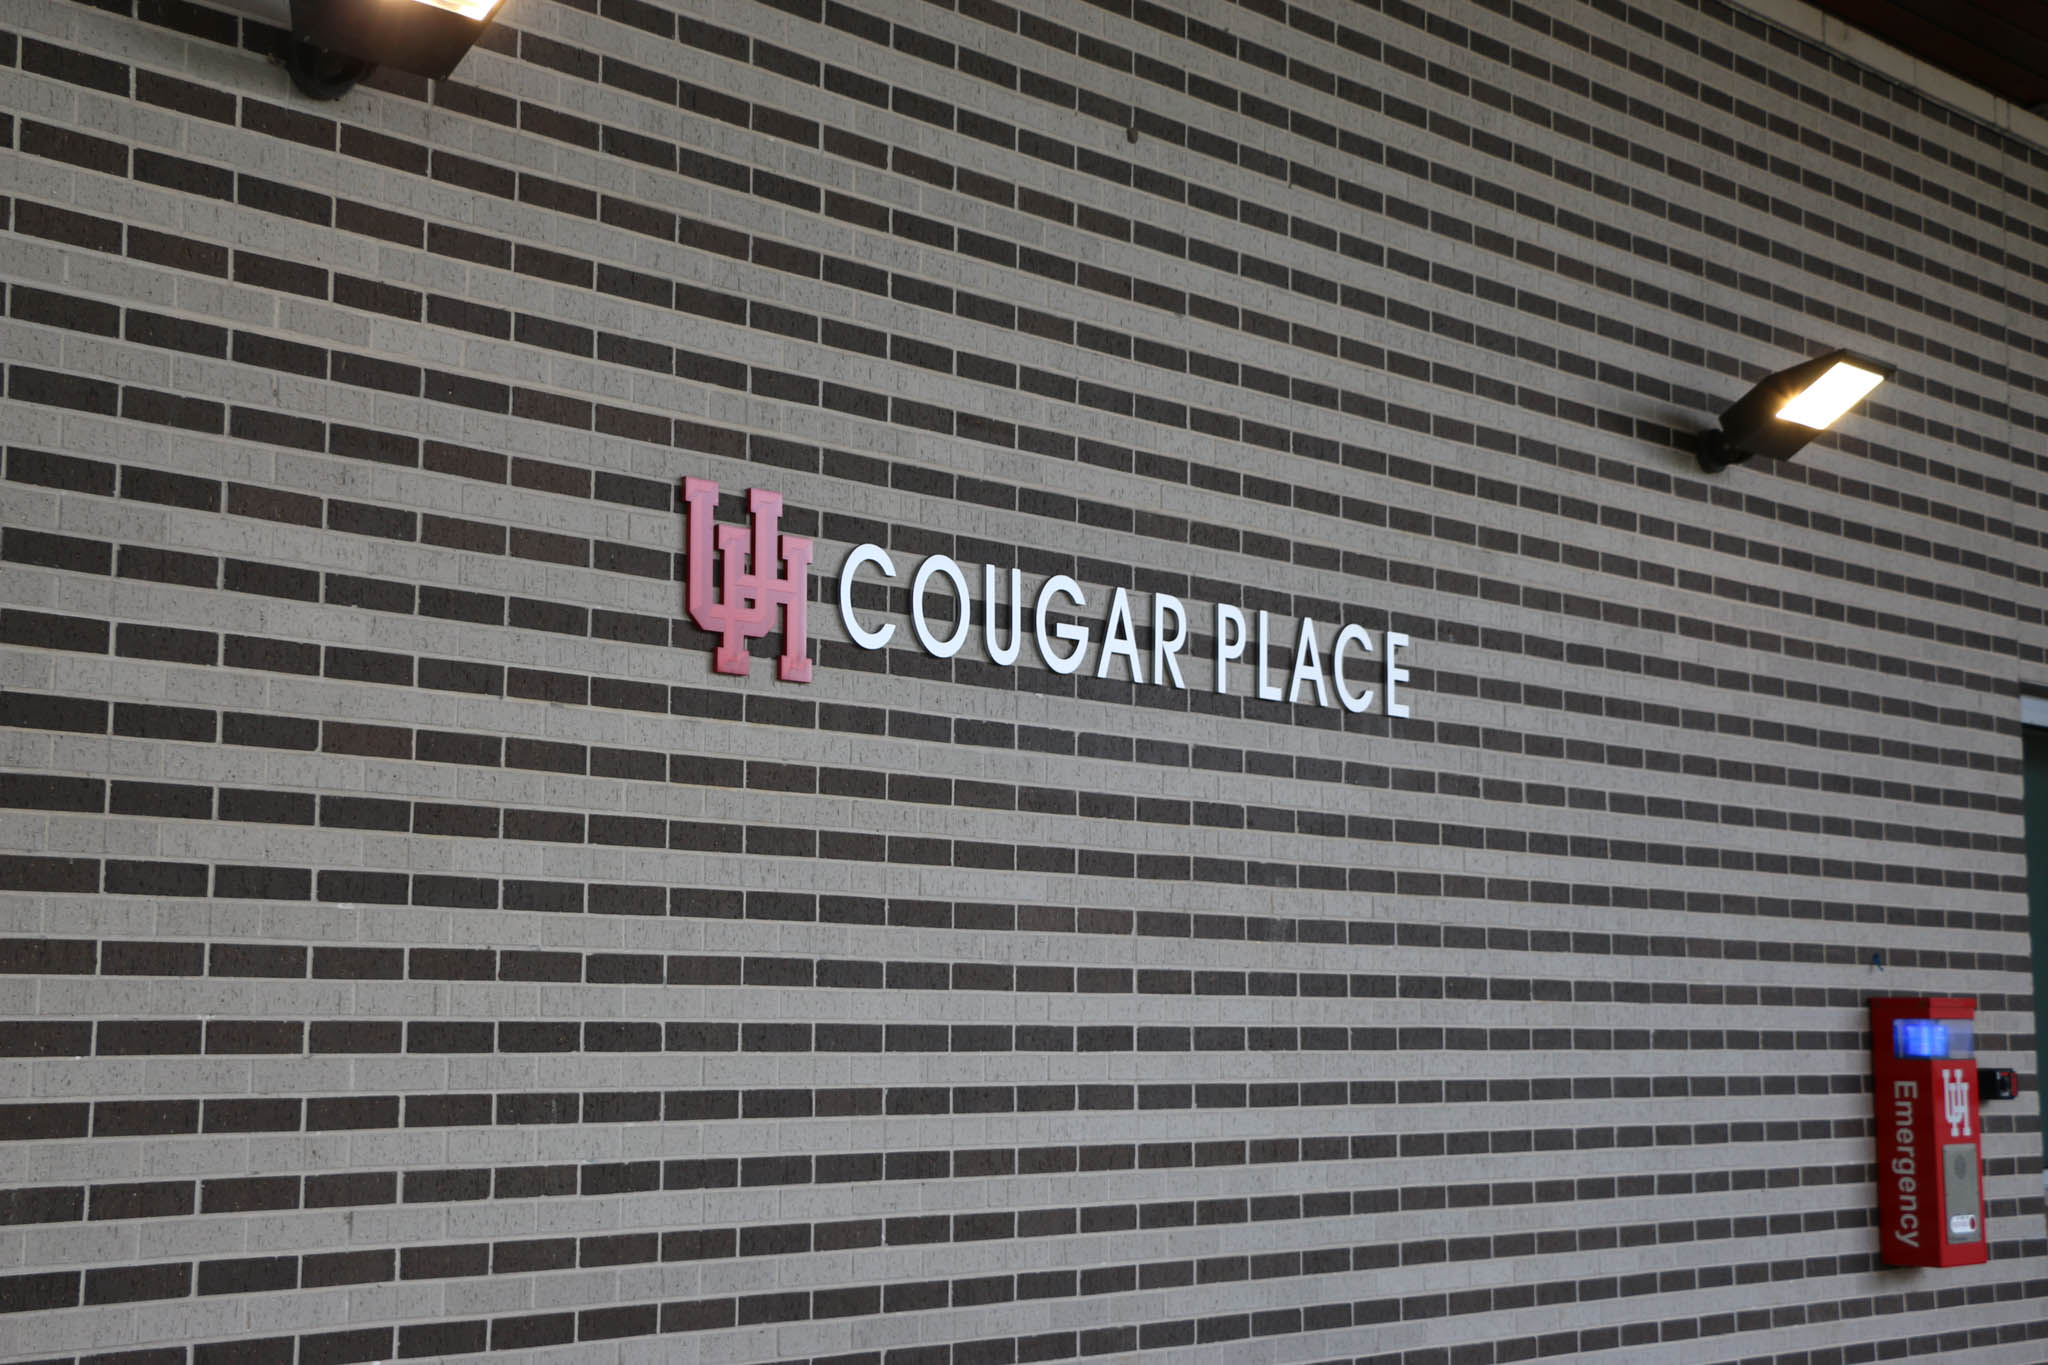 The water pressure at Cougar Place has been affected after a hit to a water line. | Sydney Rose/The Cougar